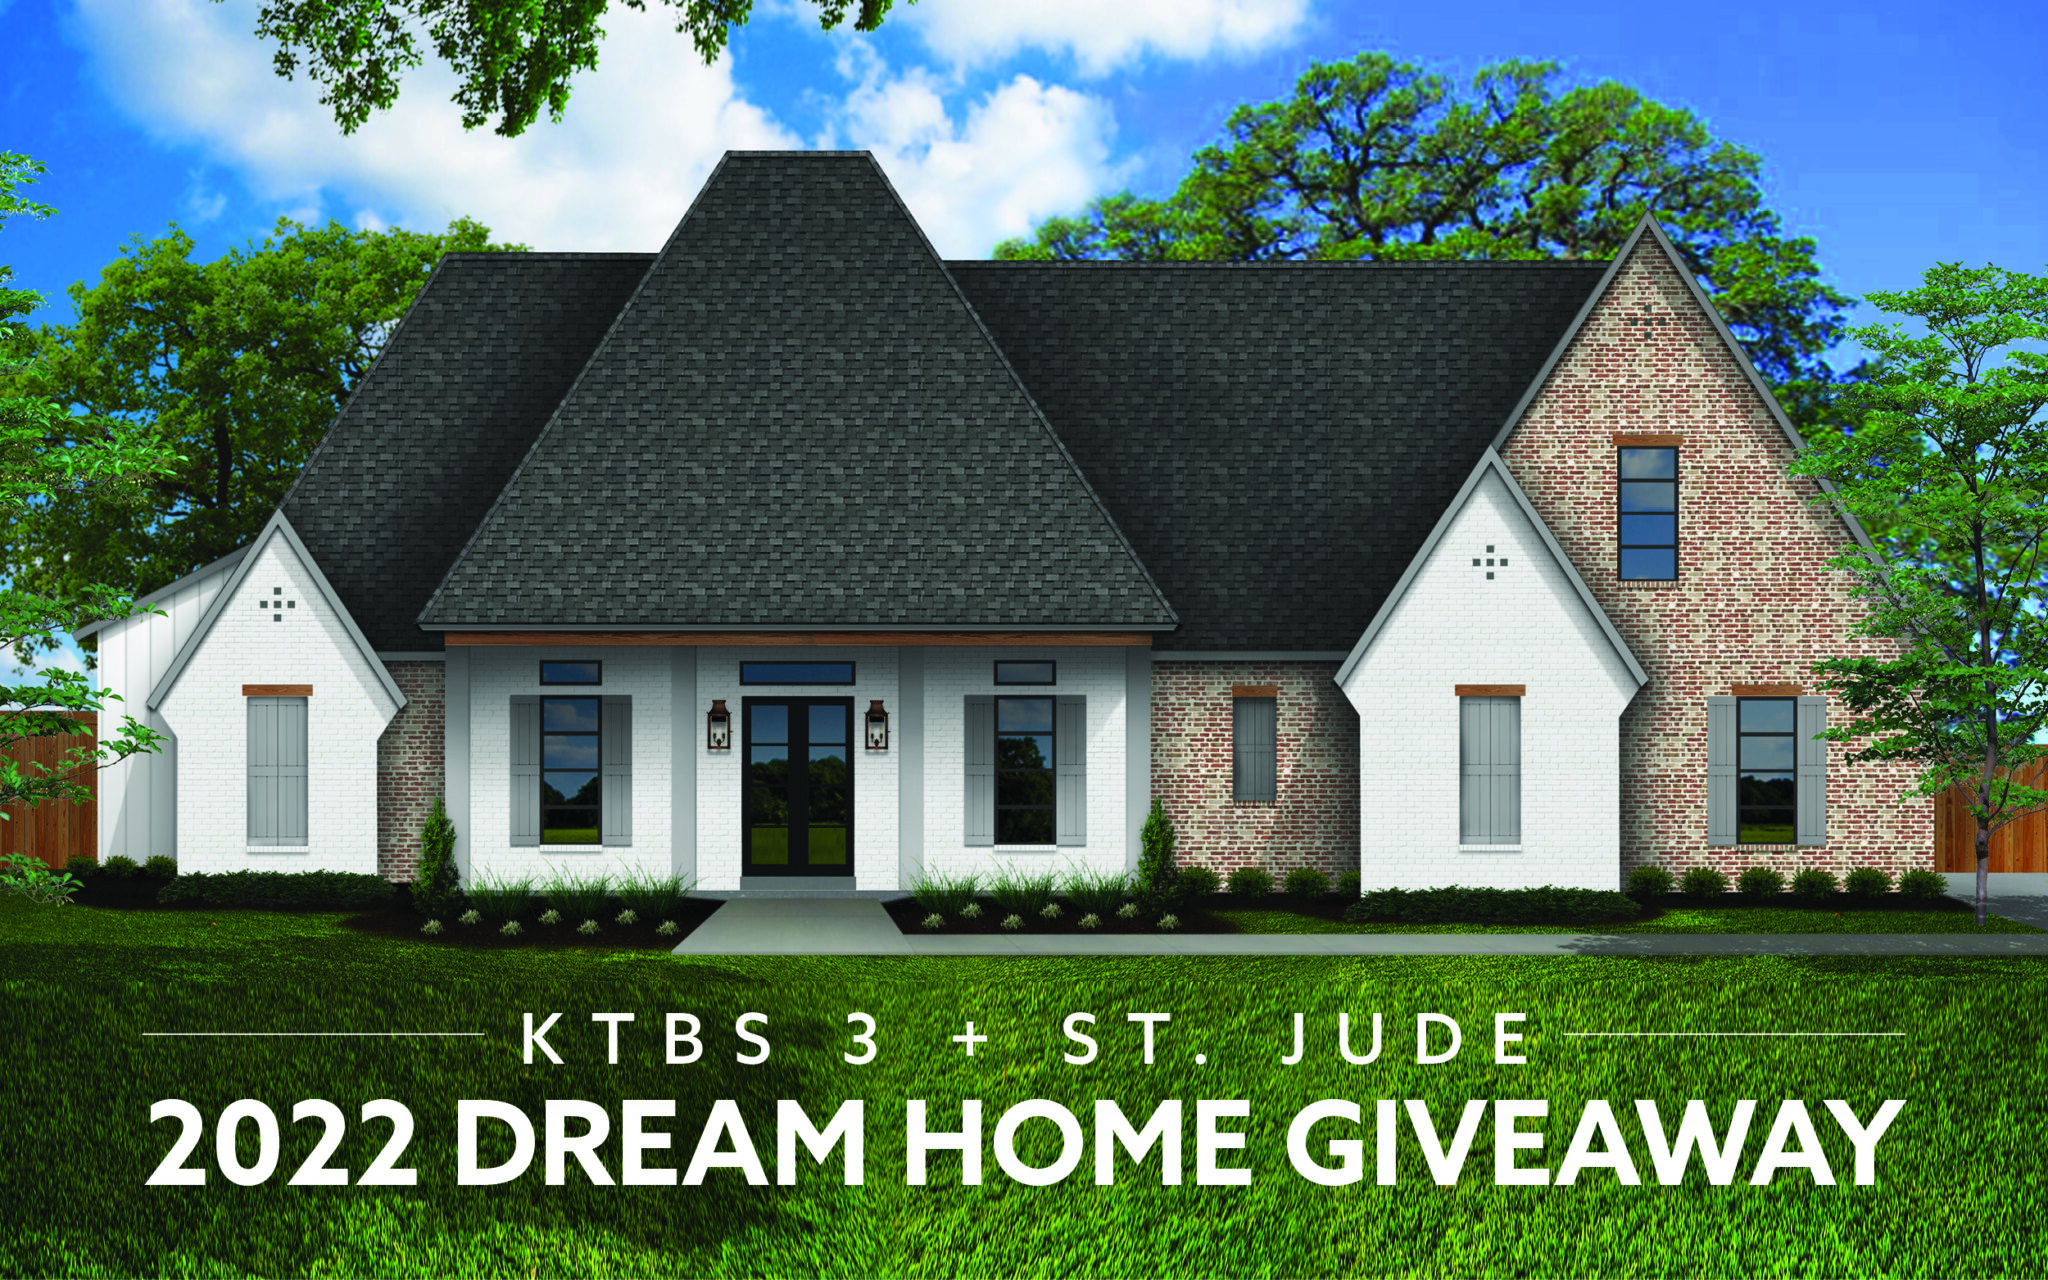 KTBS 3 + St. Jude's 2022 Dream Home Giveaway Family Living Magazine